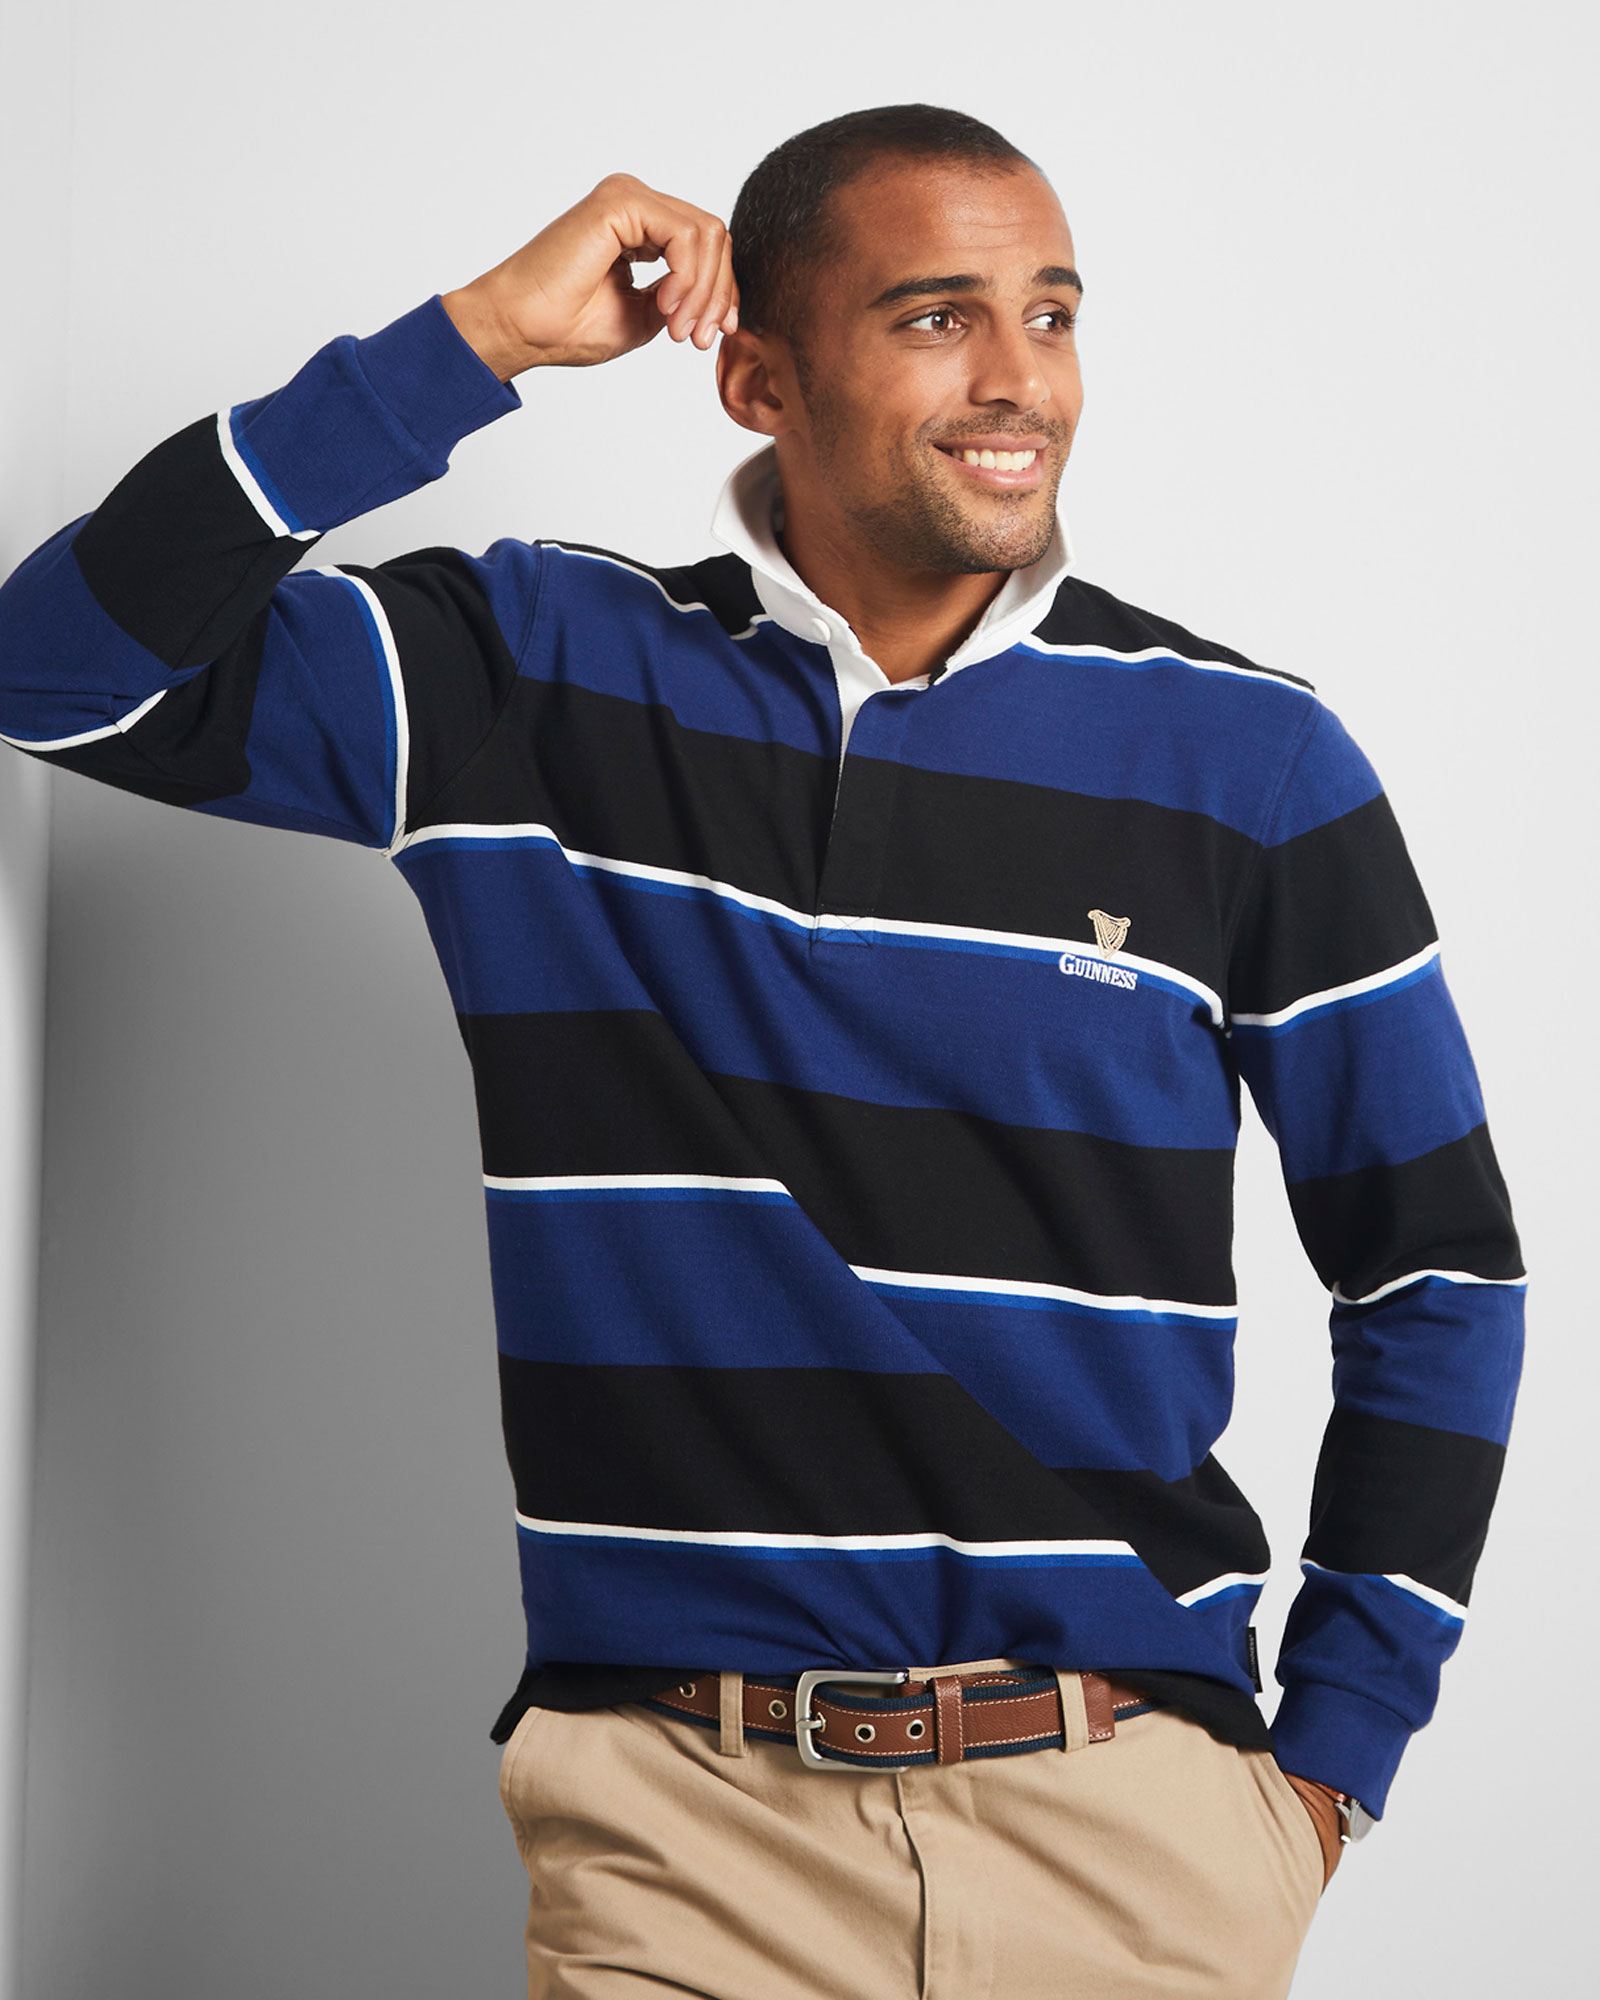 Guinness™ Long Sleeve Stripe Rugby Shirt at Cotton Traders